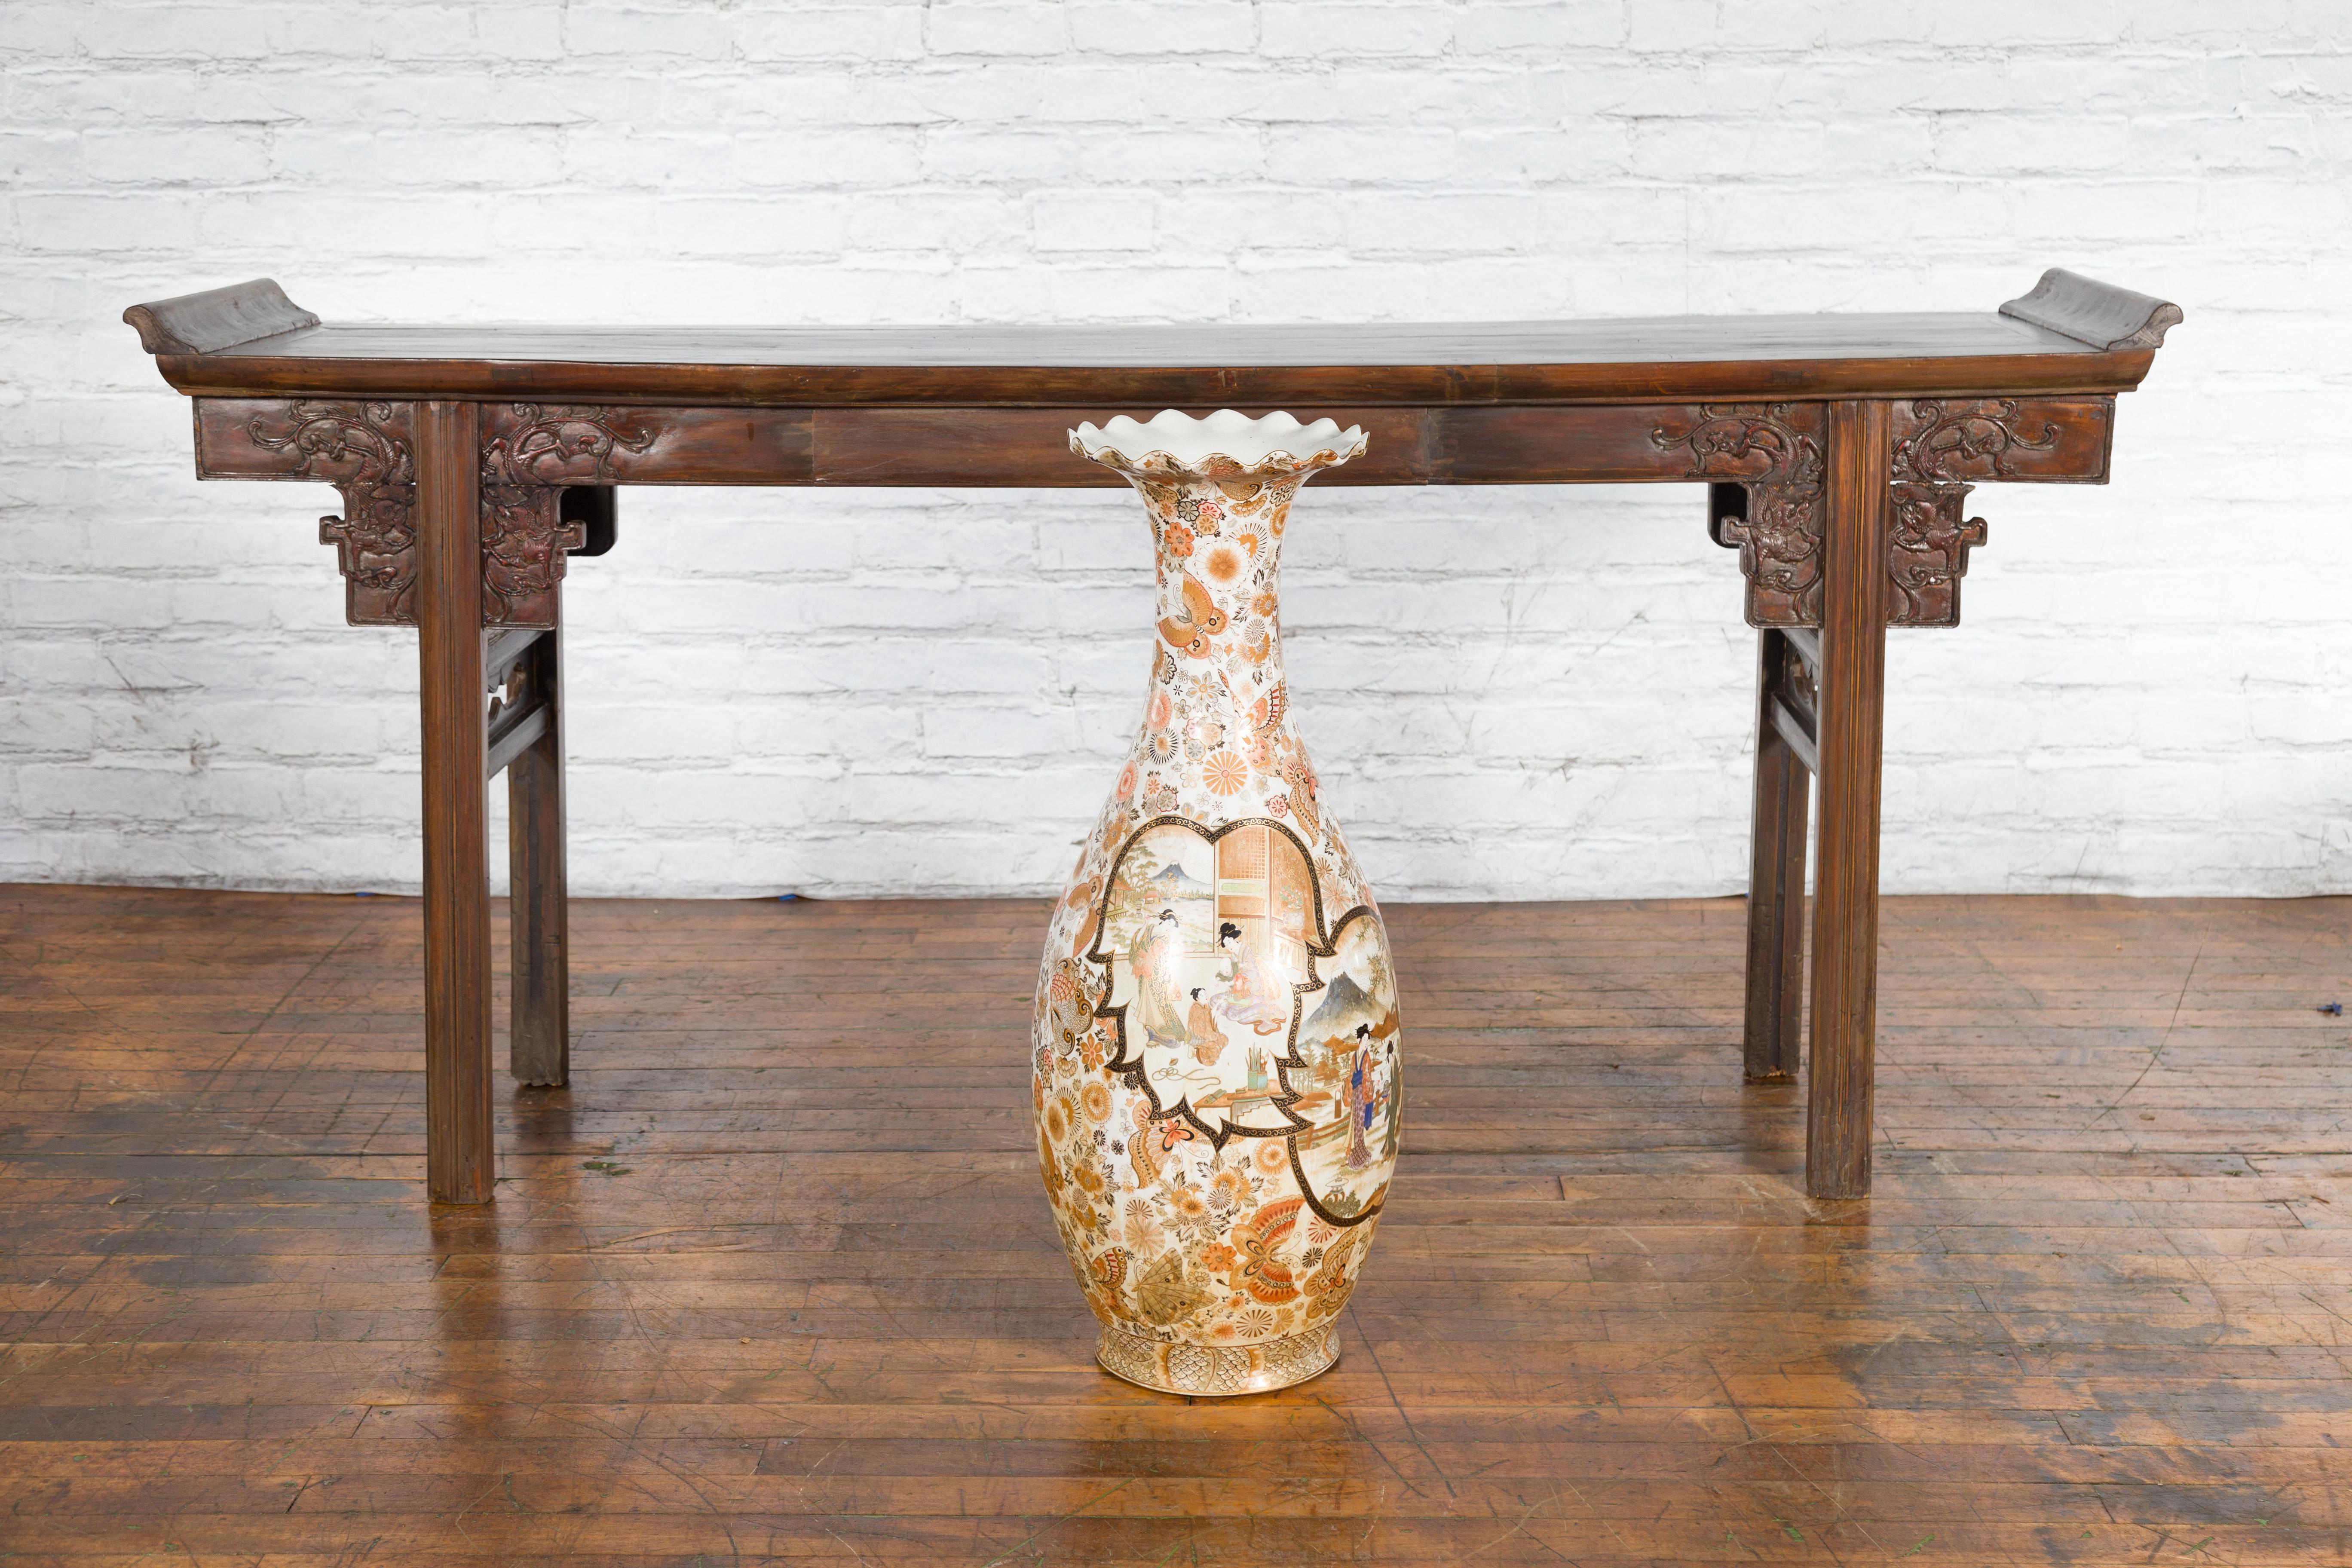 A large Japanese vintage Kutani style palace vase from the mid-20th century, with court scenes and scalloped top. Created in Japan during the midcentury period, this Kutani style palace vase features a scalloped top sitting above an orange, gold and